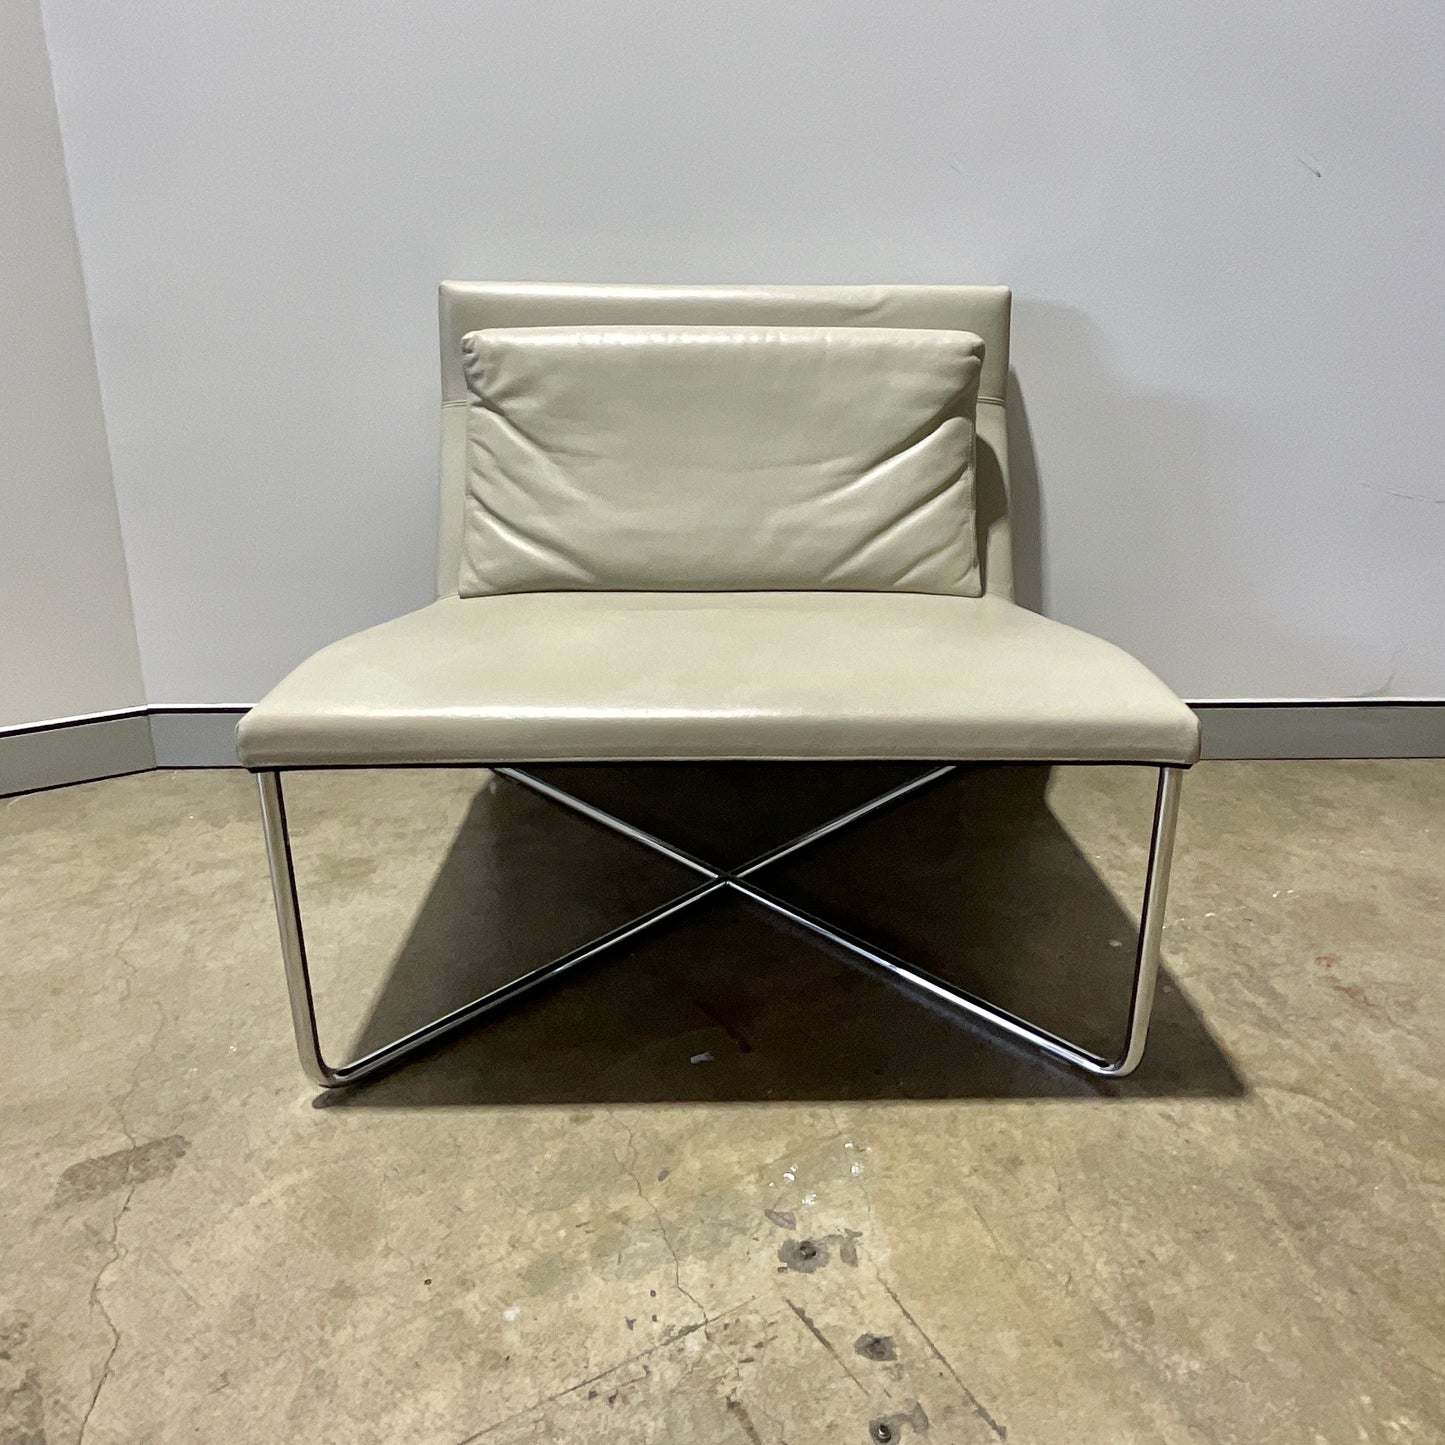 Held Chair by Rodolfo Dordoni for Minotti (4 available)